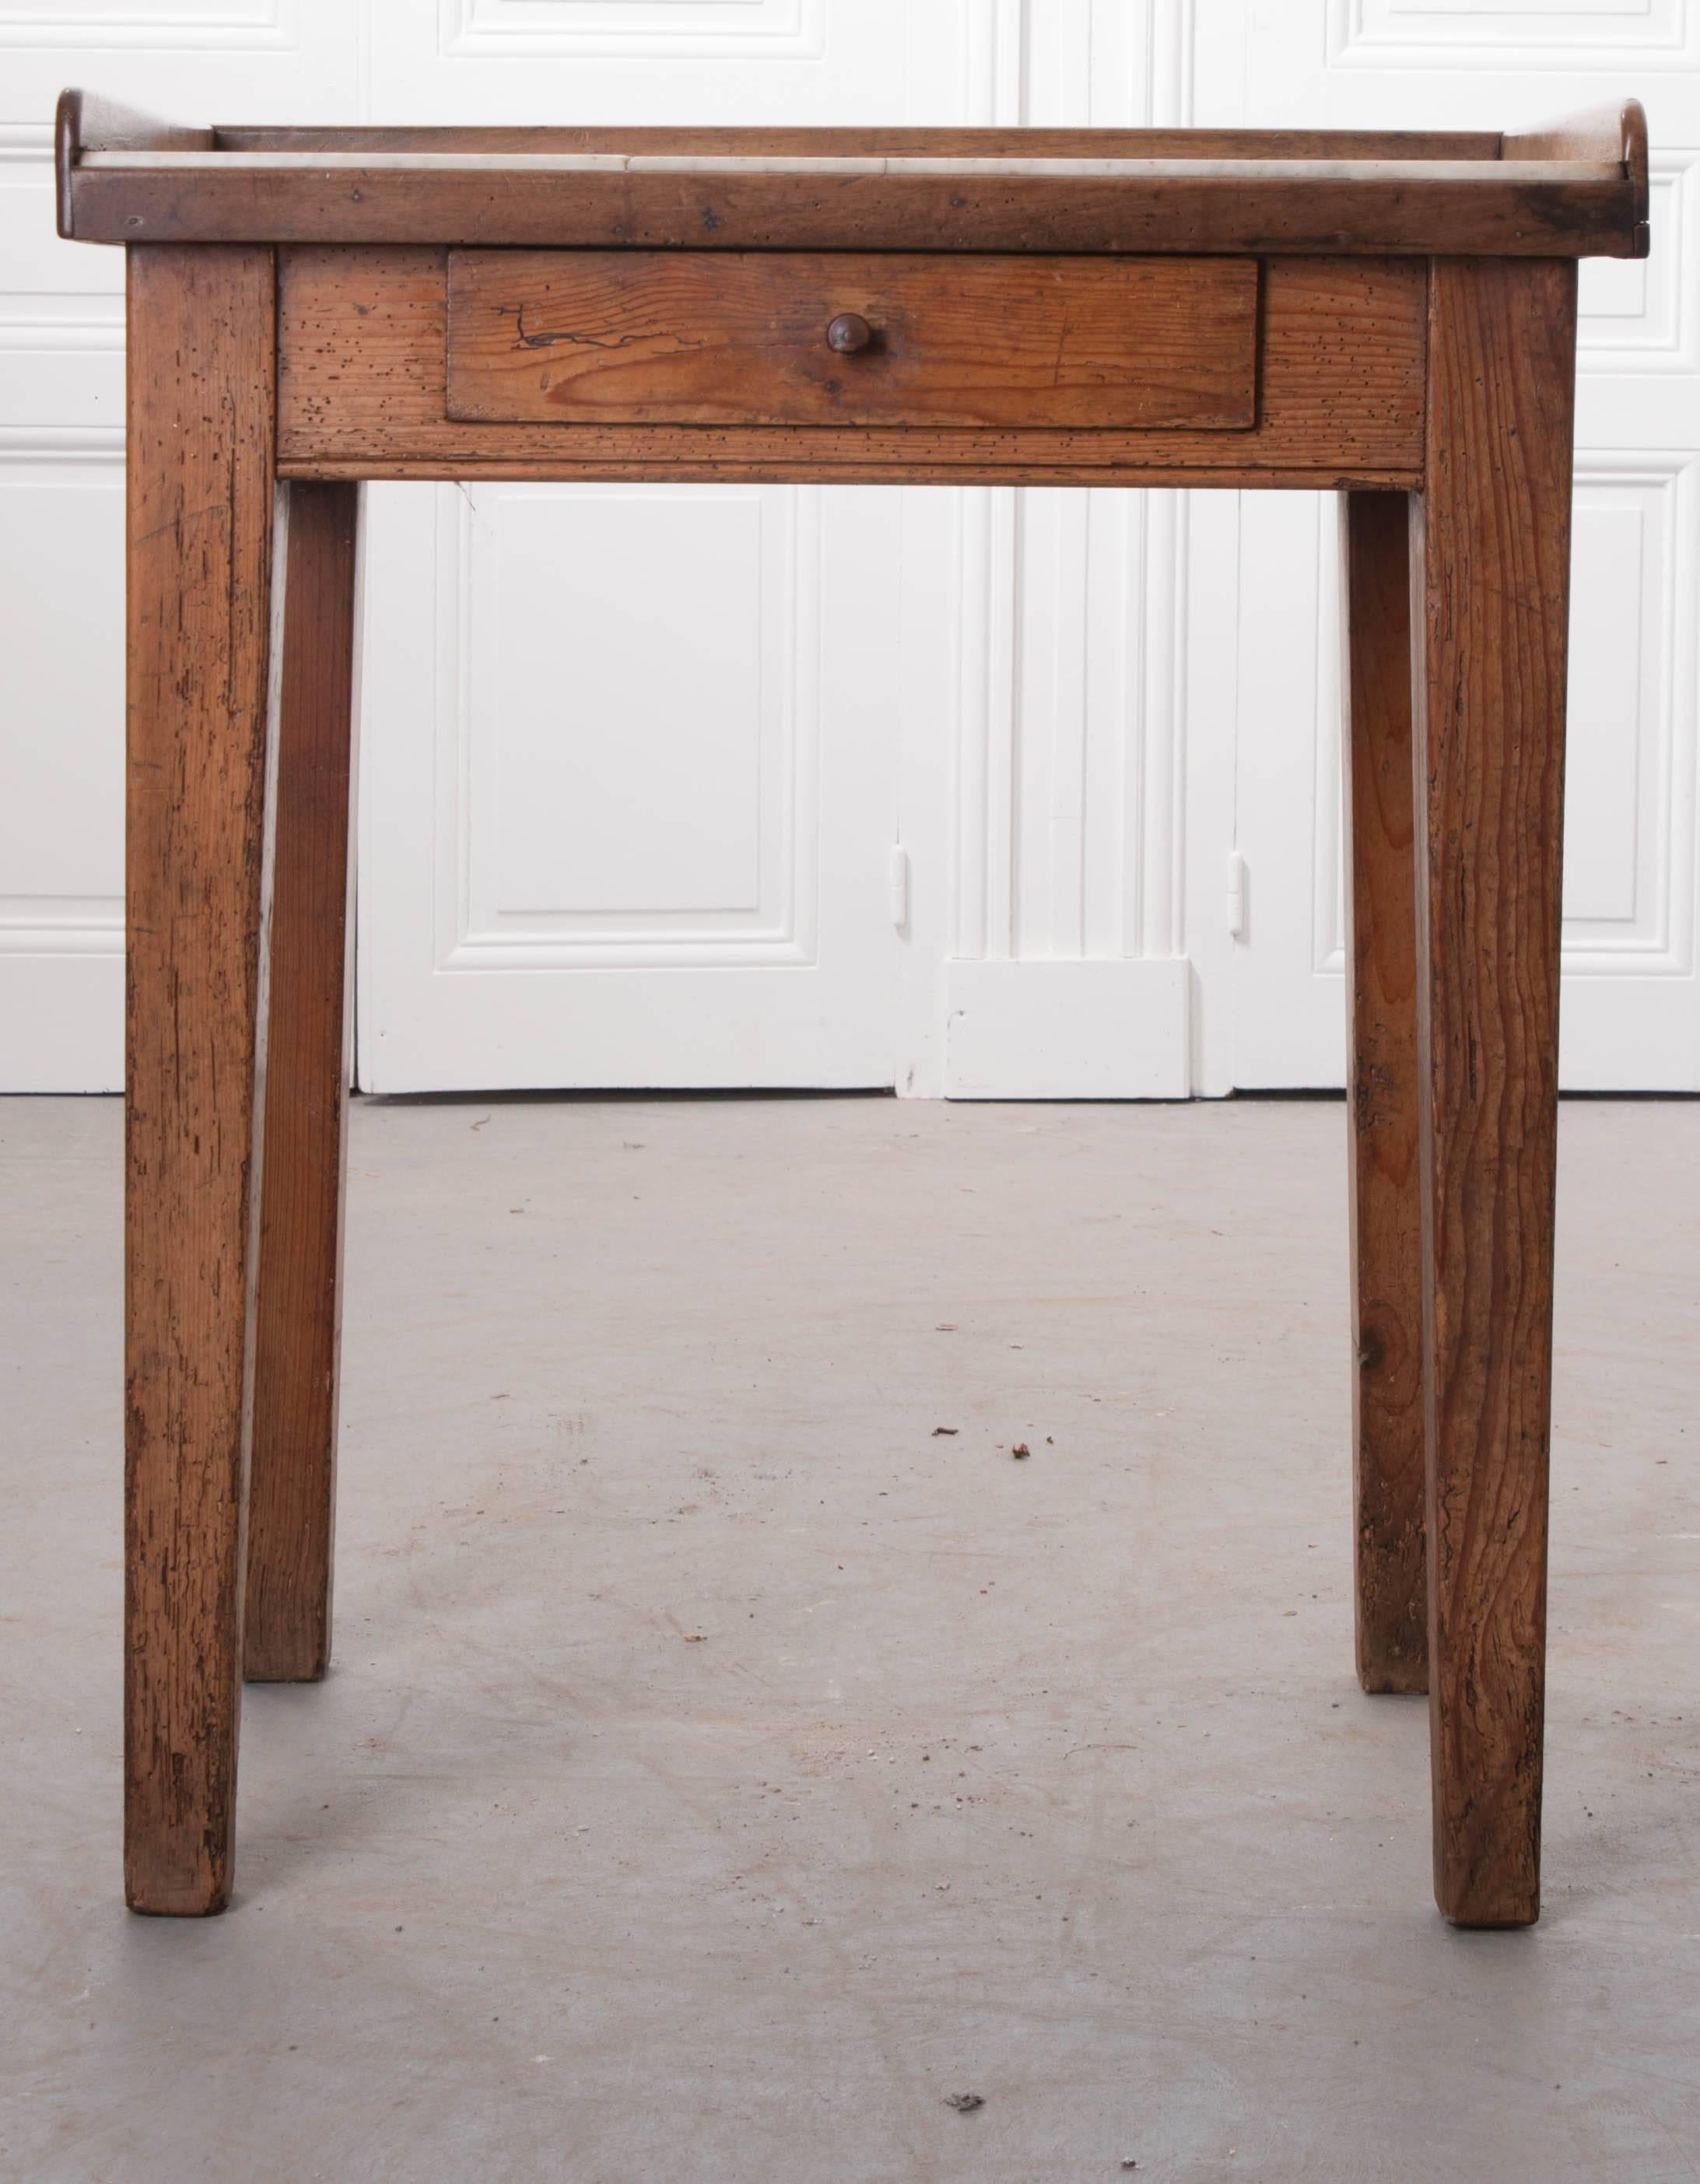 A 19th century butcher's table, made of pine, from England. This table has its original marble top, which is worn and aged, with an old crack and fracture that gives the butcher's table a matured appearance from a lifetime of use. The marble top is